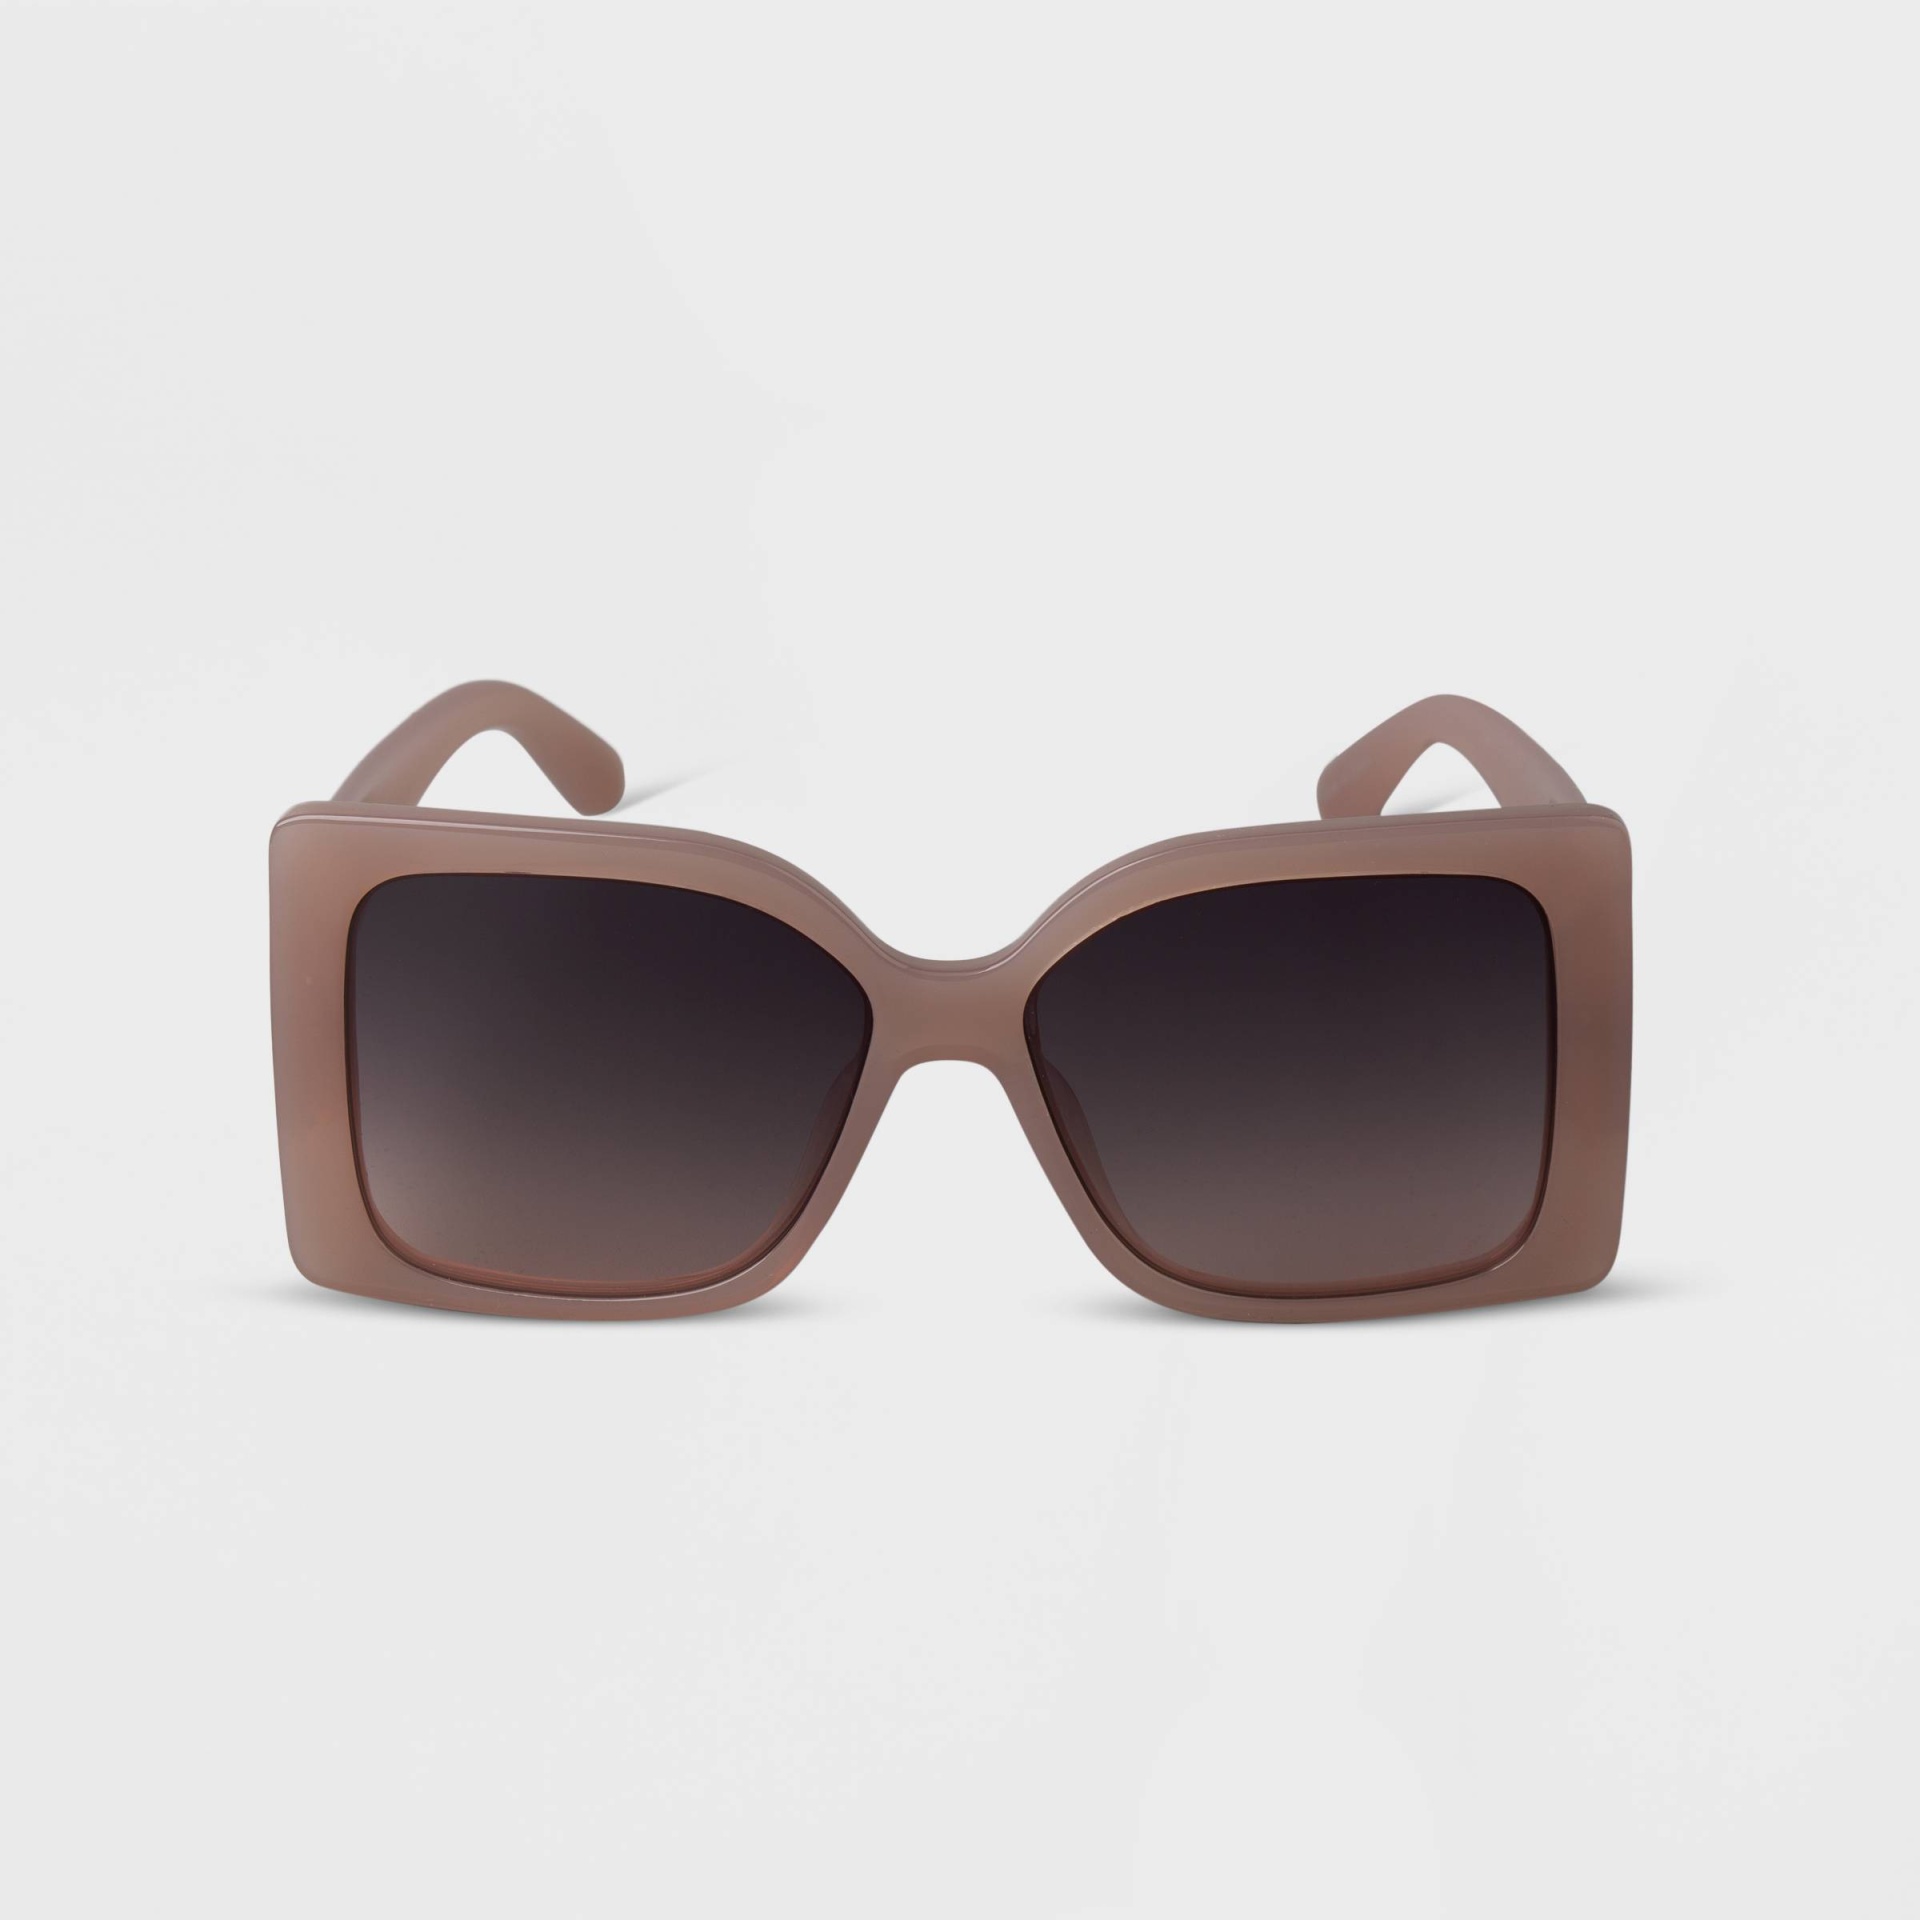 slide 1 of 2, Women's Oversized Square Sunglasses - A New Day Beige, 1 ct